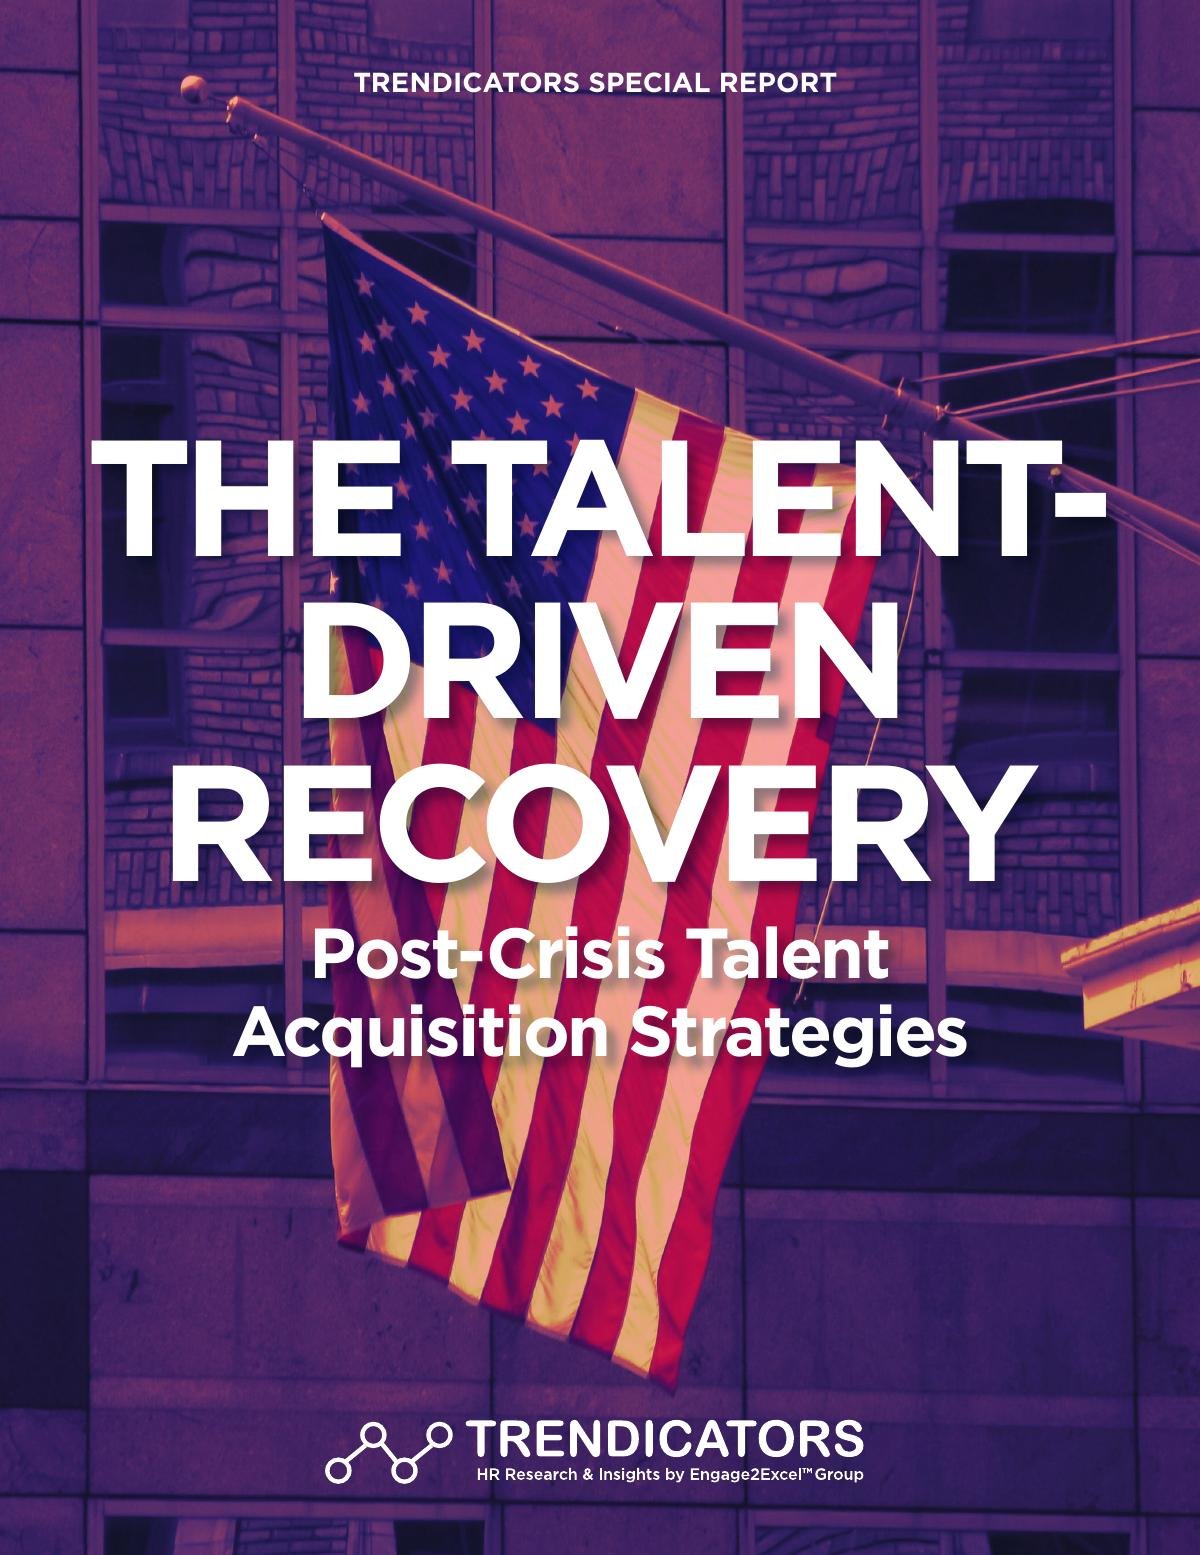 The Talent Driven Recovery